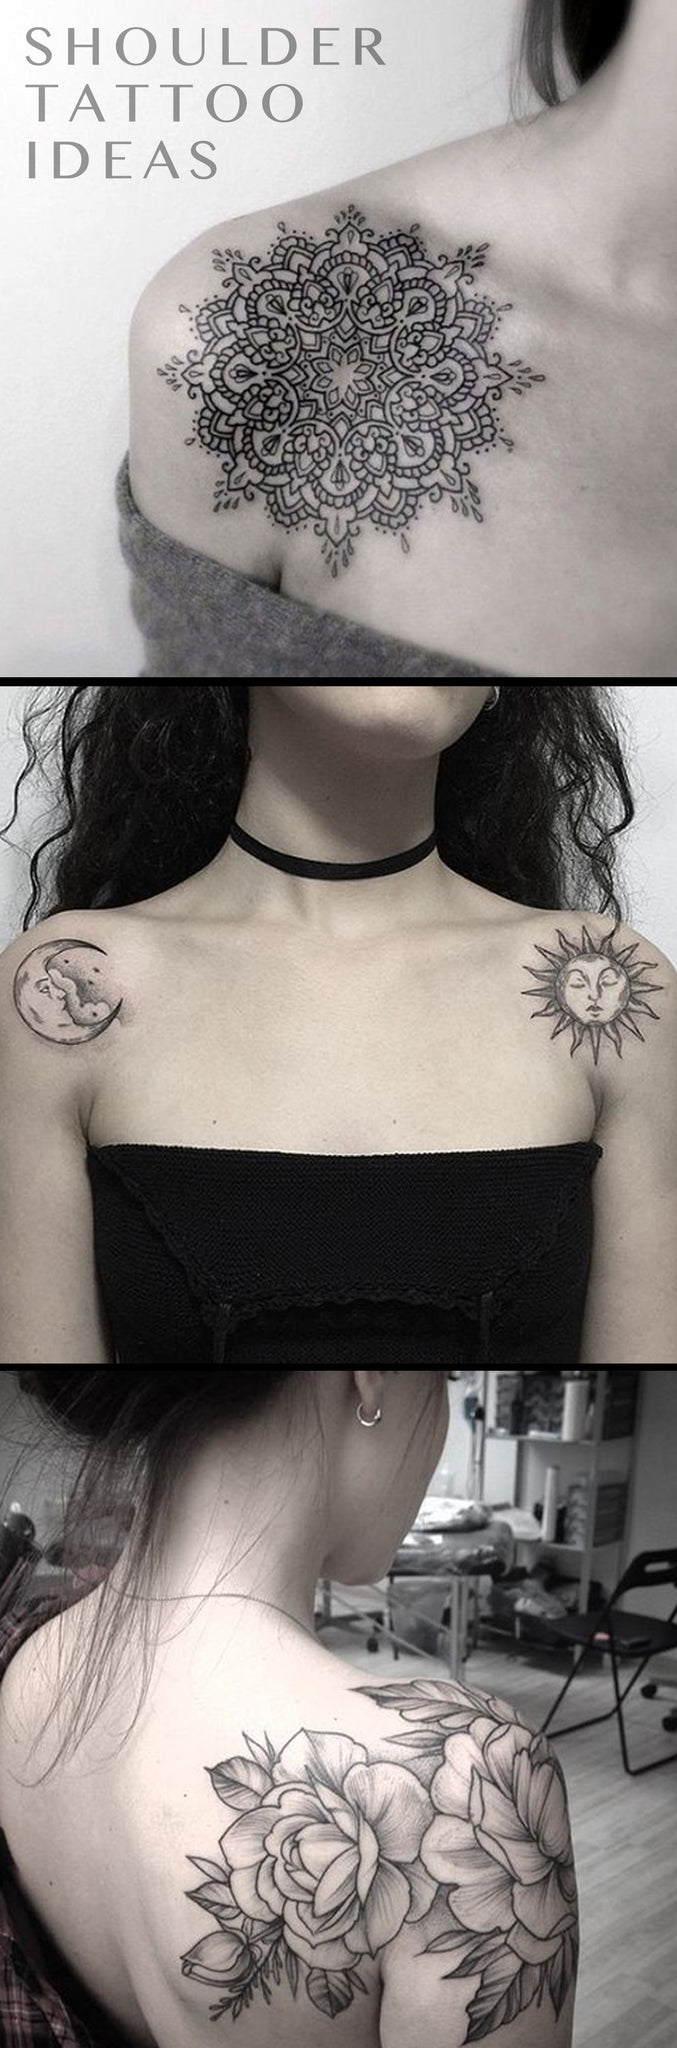 Popular Shoulder Tattoo Ideas for Woman - Black and White Geometric Mandala idées de tatouage with Meaning - Sun and Moon Ideas Del Tatuaje - Delicate Vintage Floral Flower Tattoo Ideen - www.MyBodiArt.com